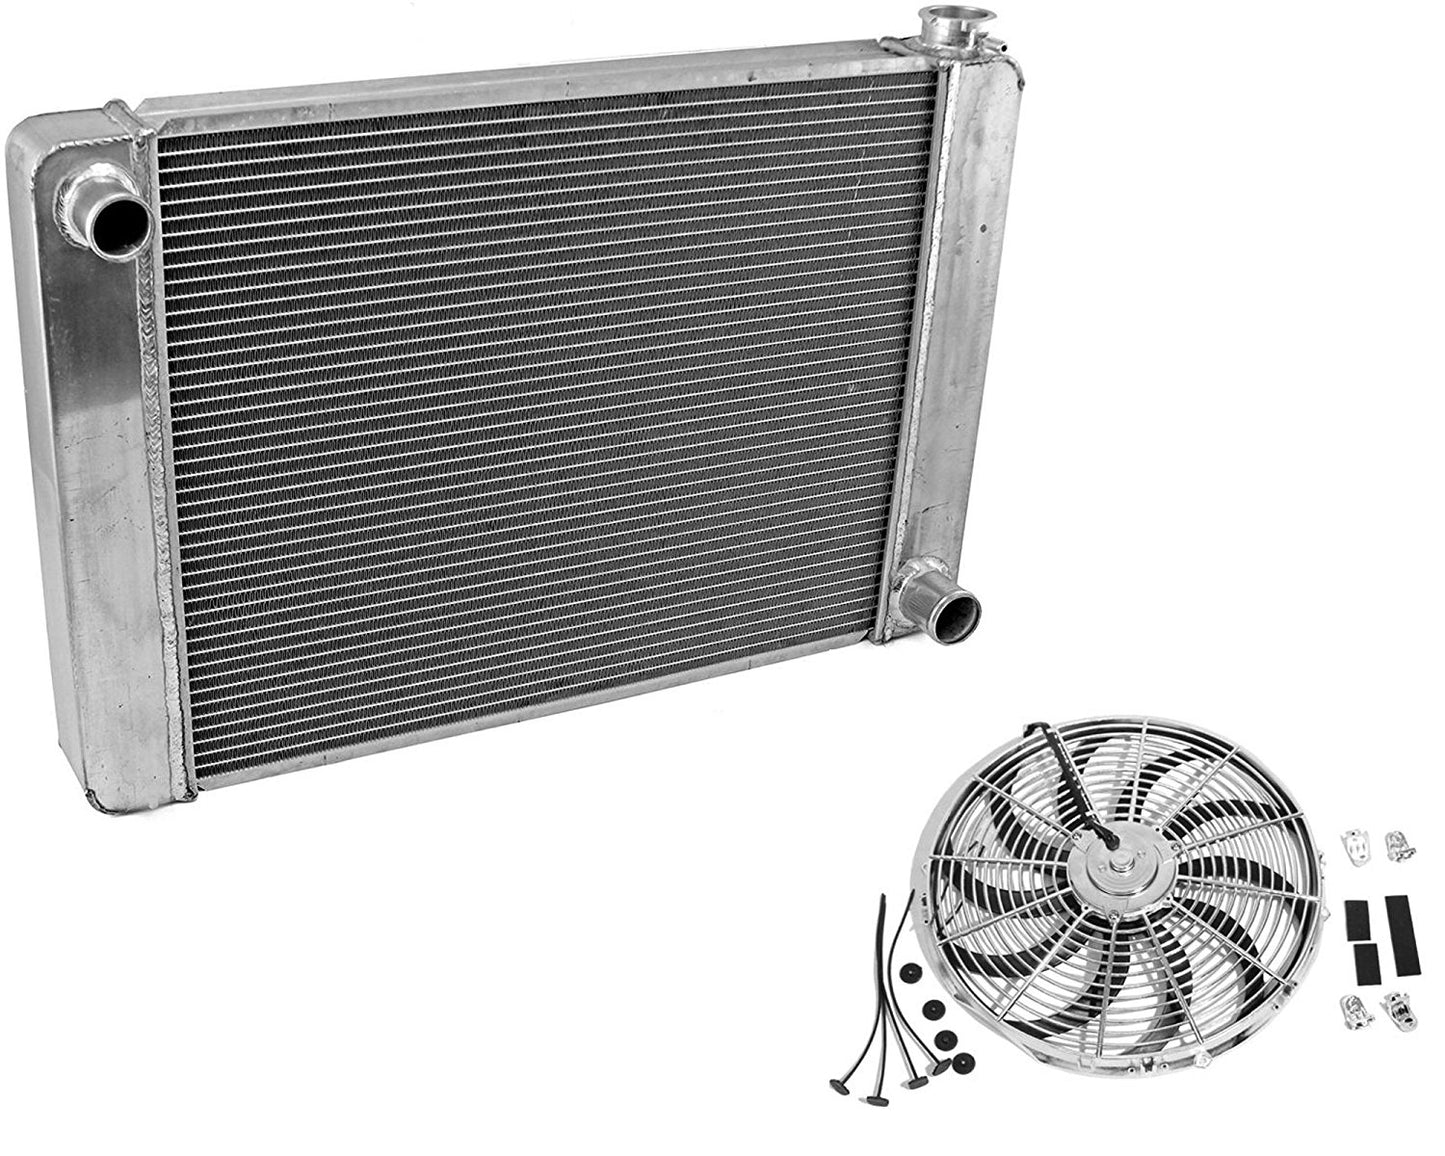 Fabricated Aluminum Radiator 30" x 19" x3" Overall For SBC BBC Chevy GM & 12" Chrome Electric Curved Blade Reversible Cooling Fan